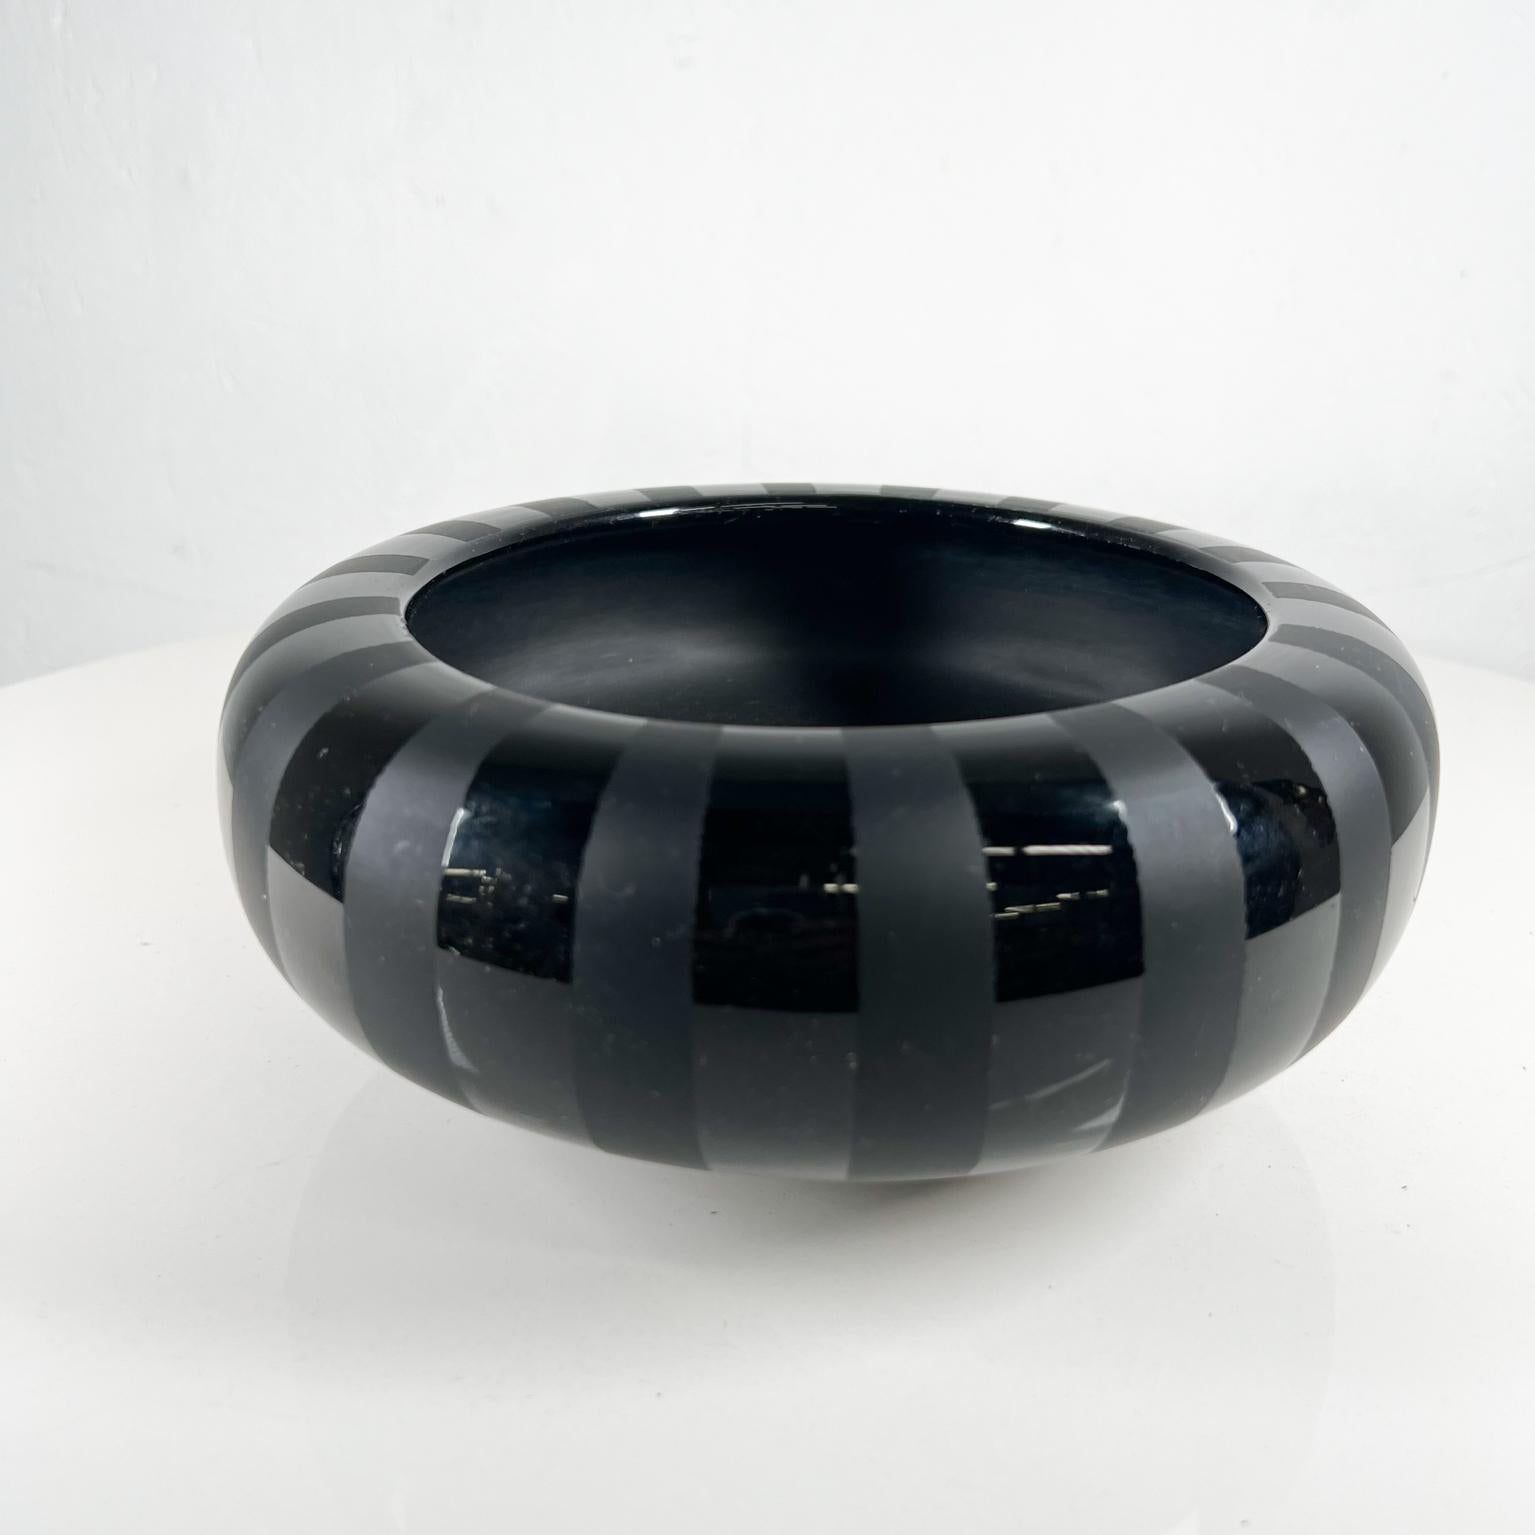 Vintage Midcentury Black Stripe Blackware Pottery Bowl
Style of Santa Clara del Cobre
Unsigned.
Black Satin and glass
8.5 diameter x 3.38 tall
Preowned original vintage.

See images provided.